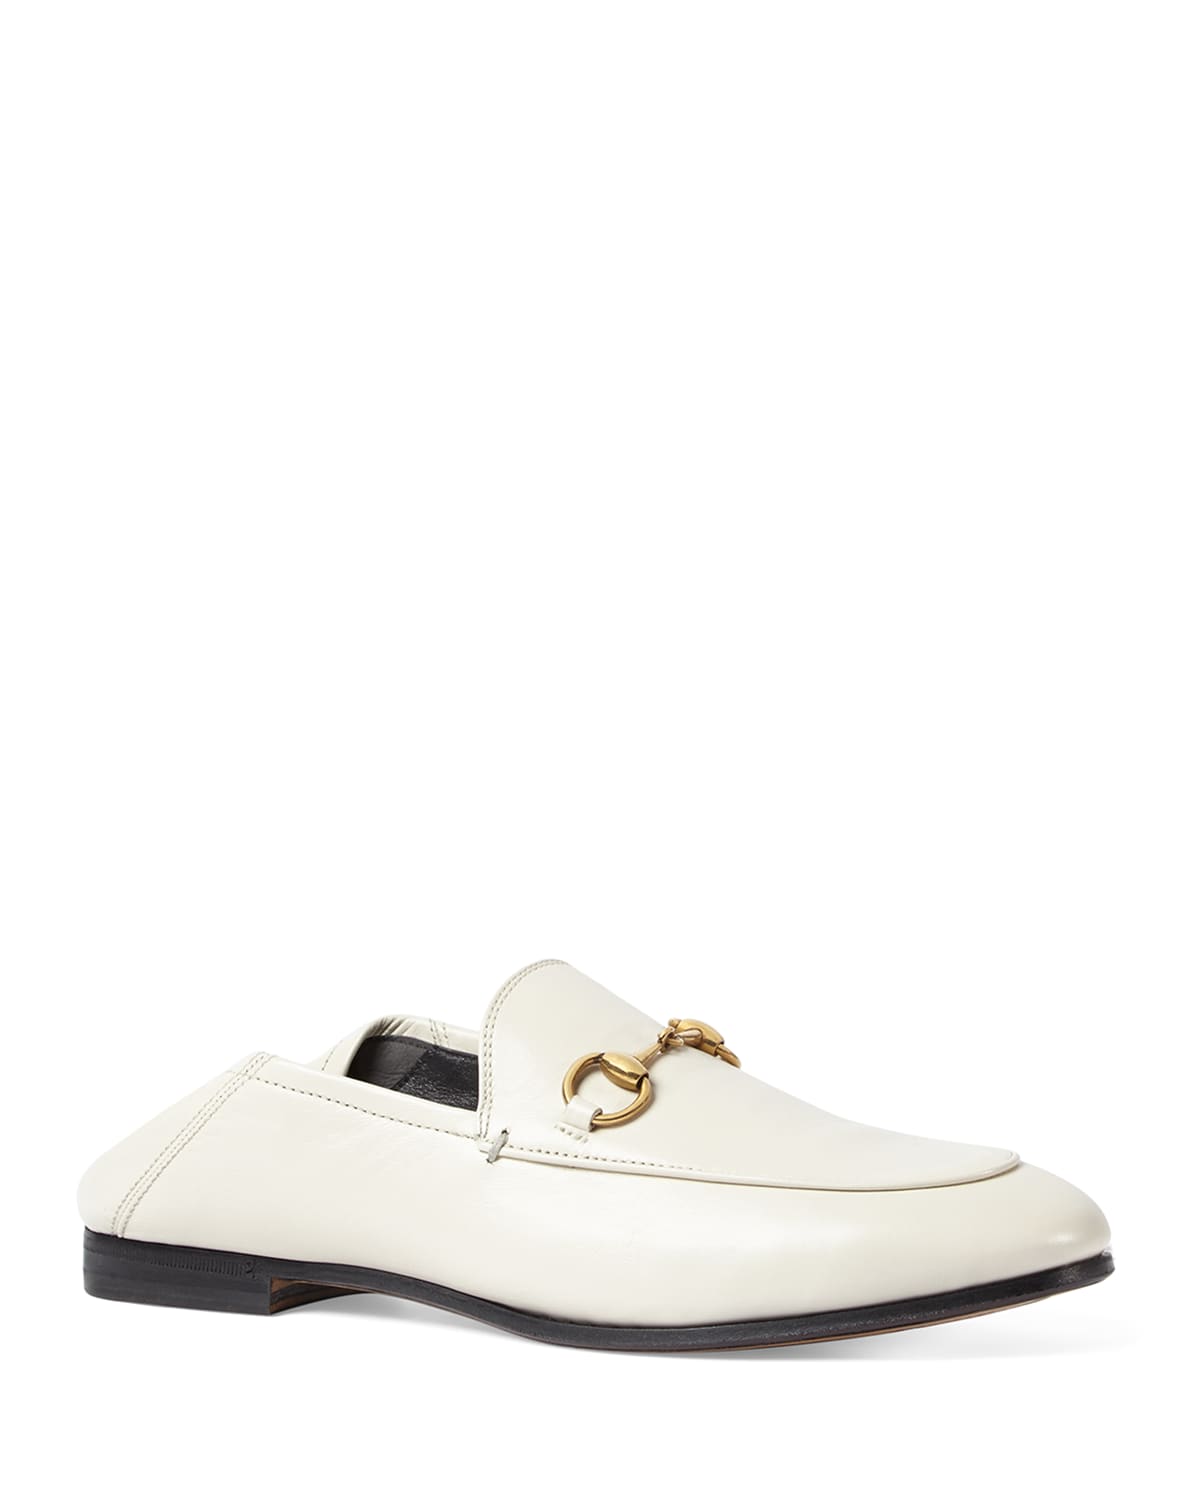 GUCCI BRIXTON LEATHER HORSEBIT LOAFERS